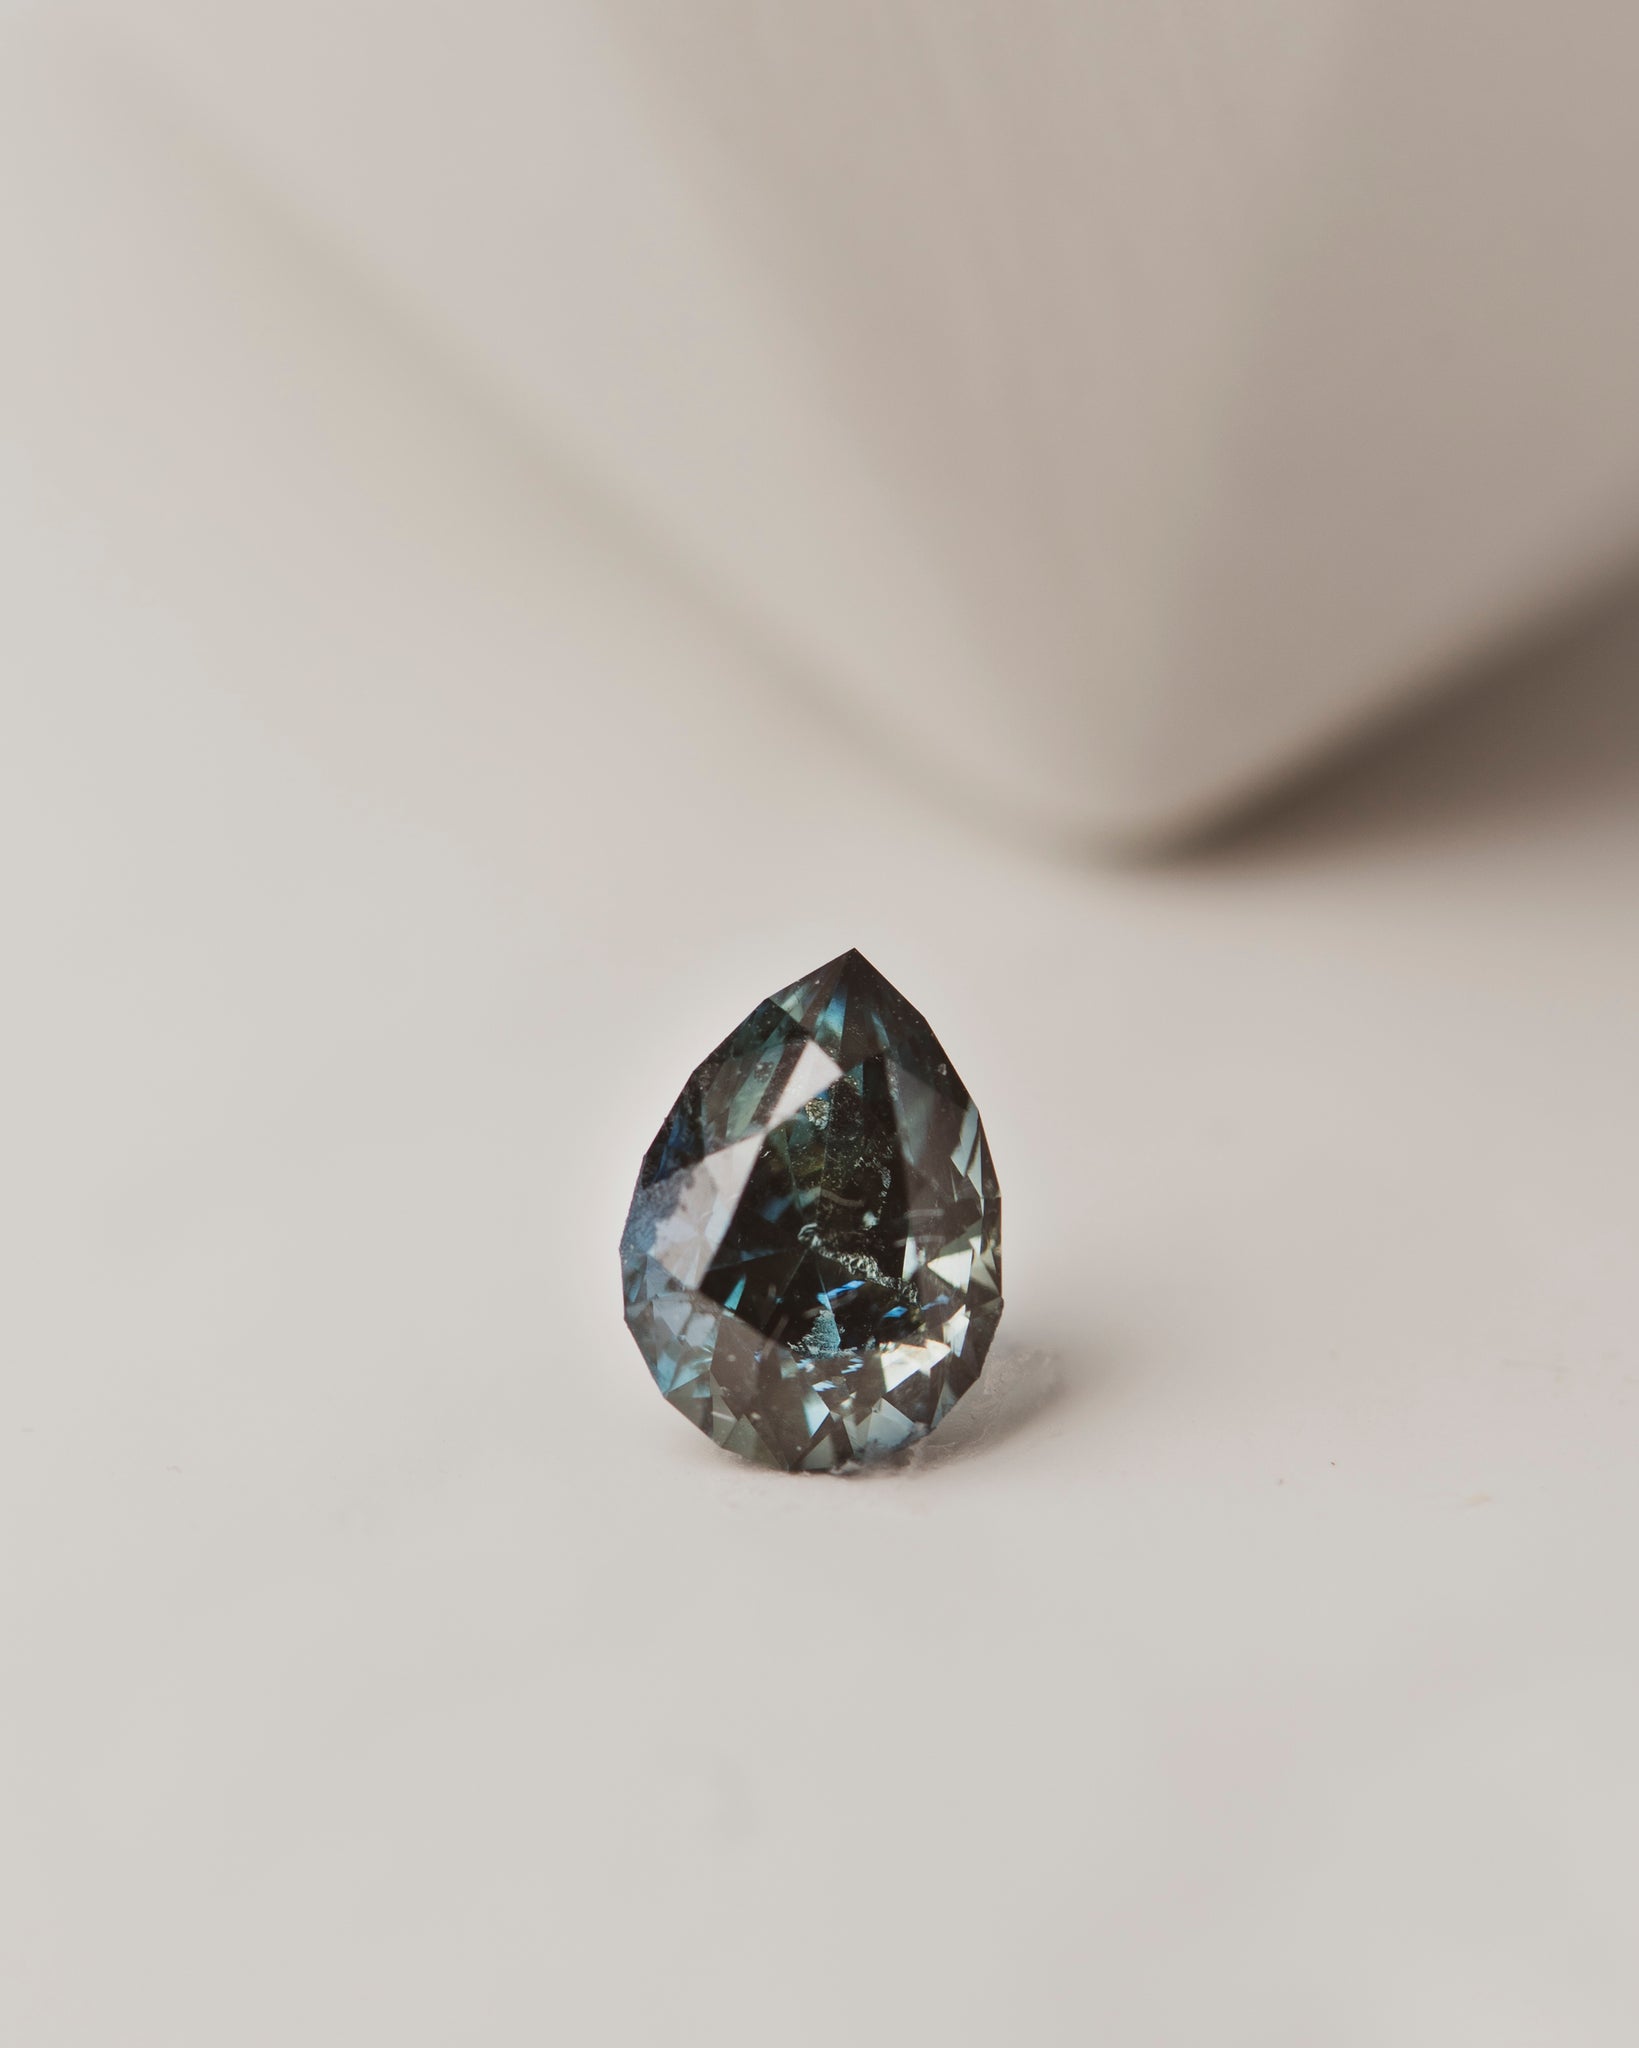 This 1.4 carat blue-green sapphire is pear cut and was responsibly mined in Nigeria, perfect for a custom engagement ring